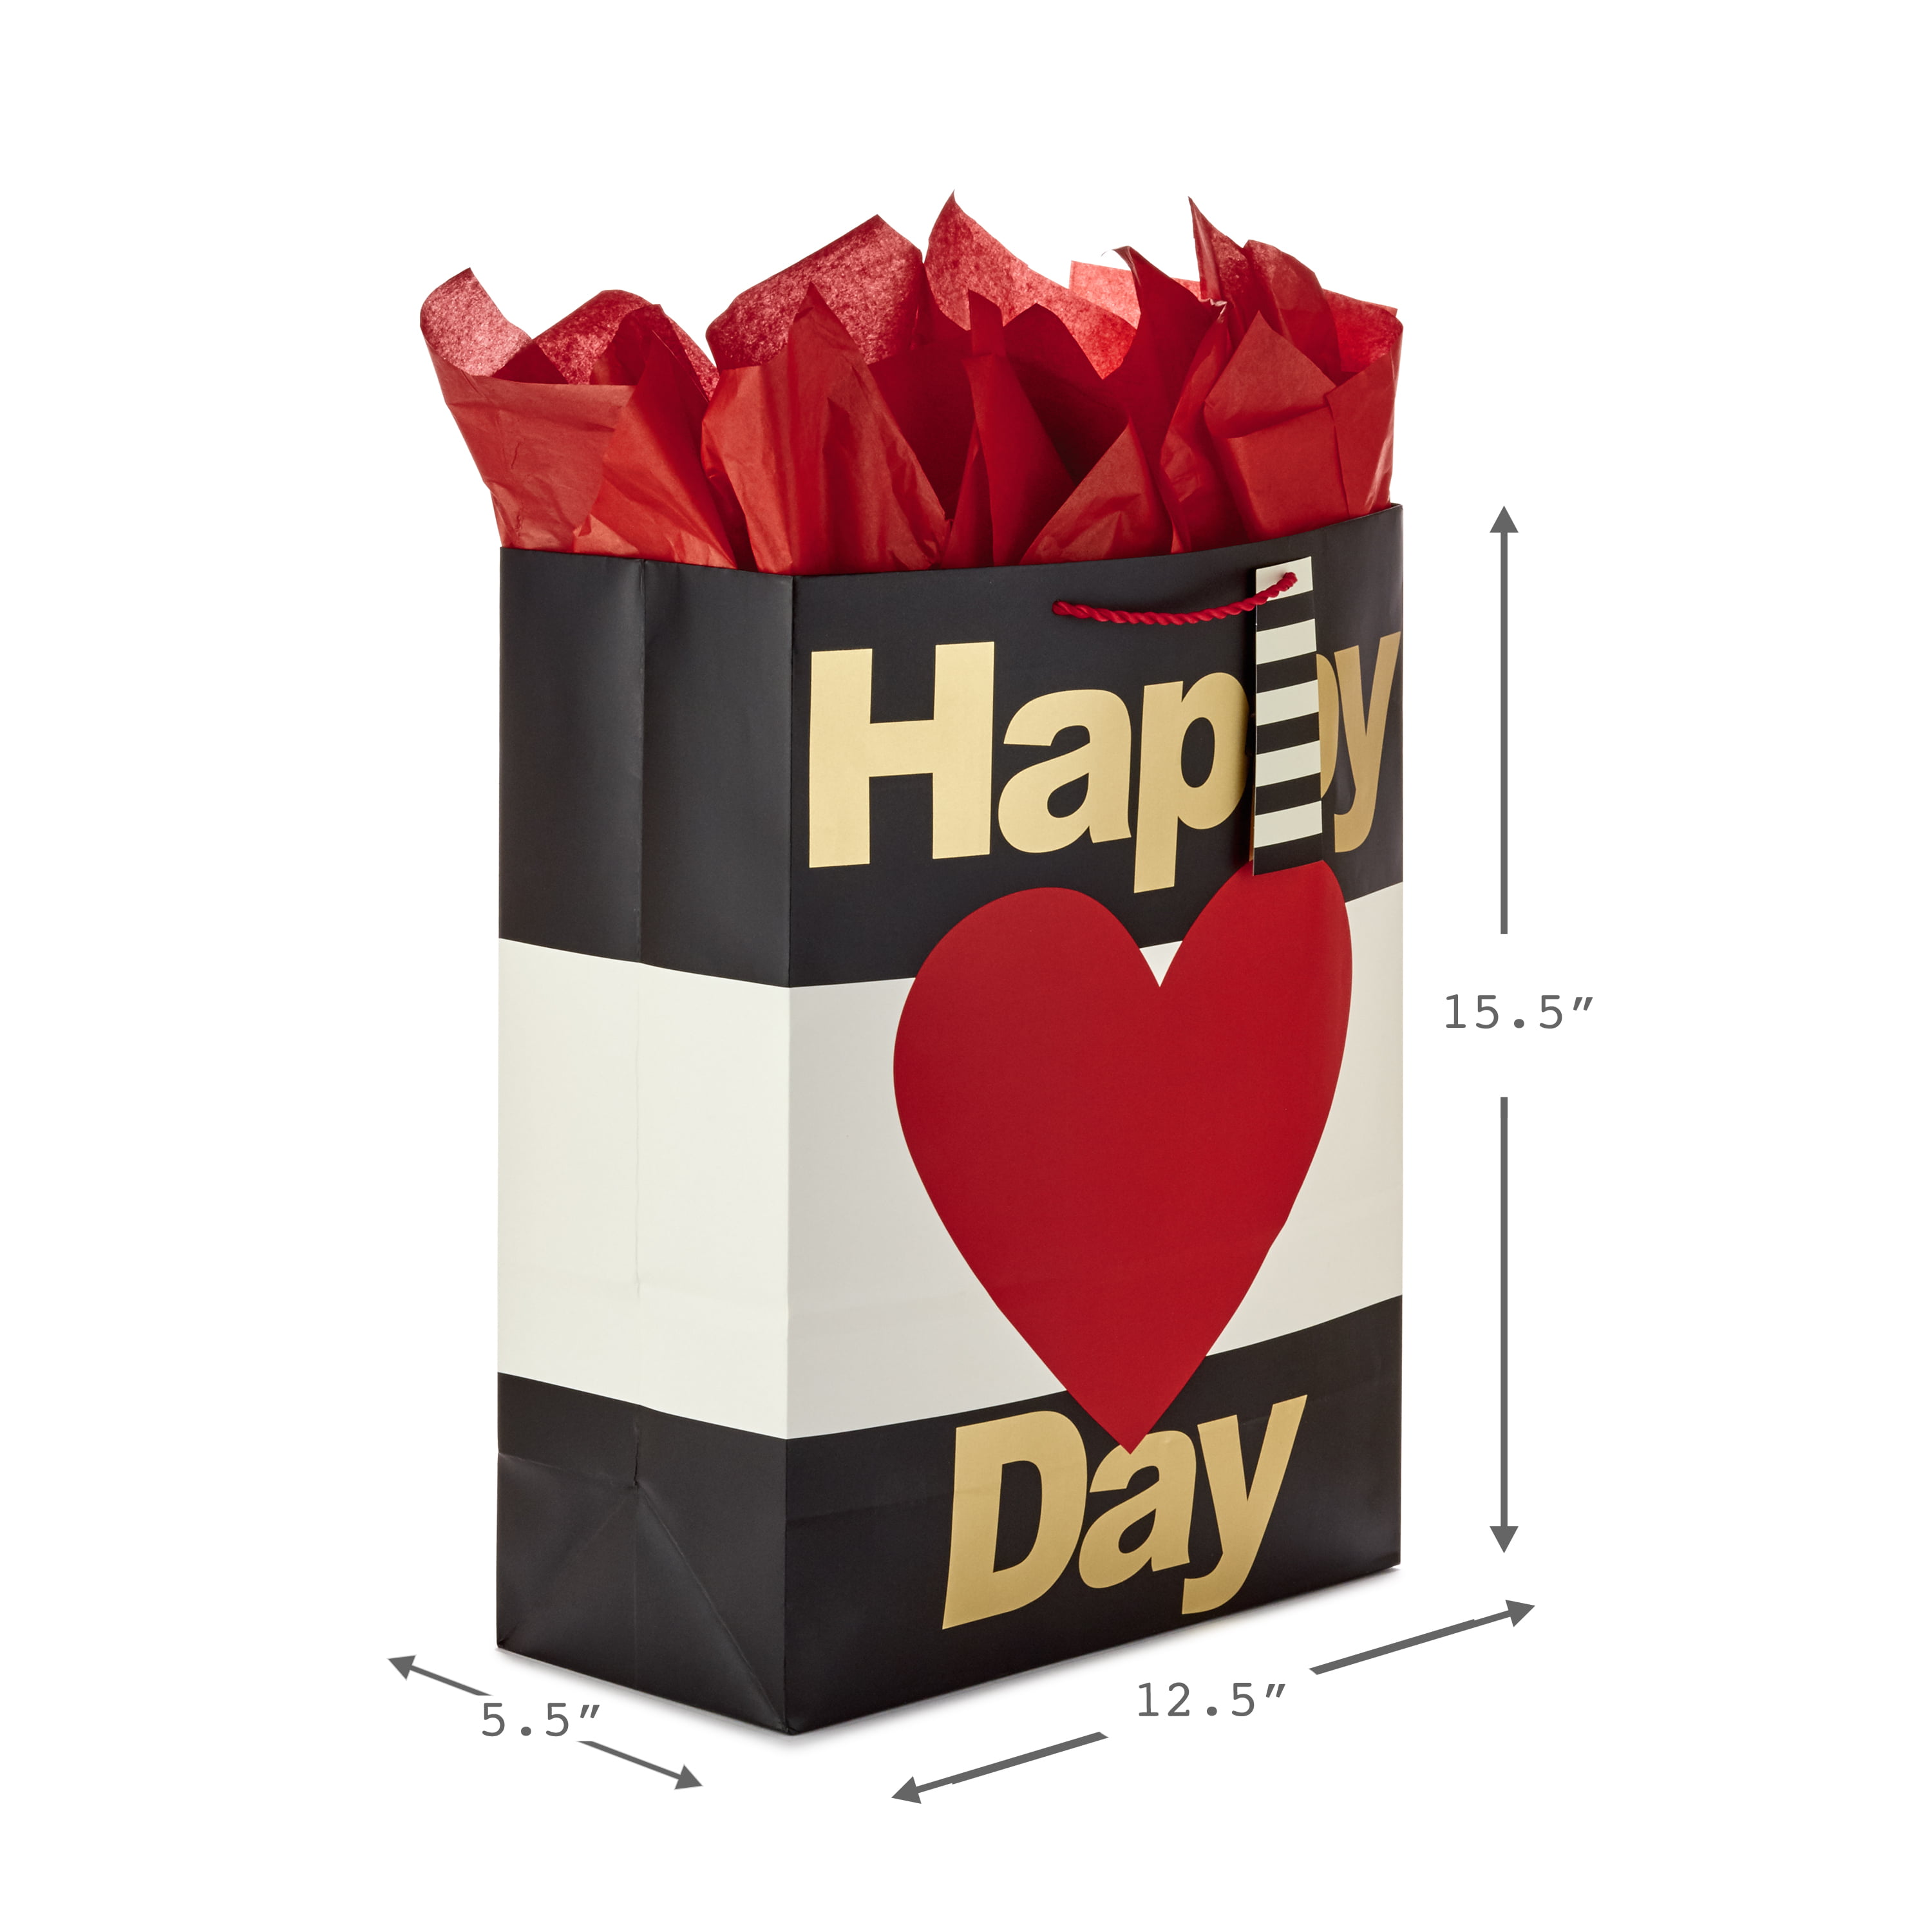 RED VALENTINES DAY GIFT BOXES AND x 2 TISSUE PAPER VALENTINE'S DAY